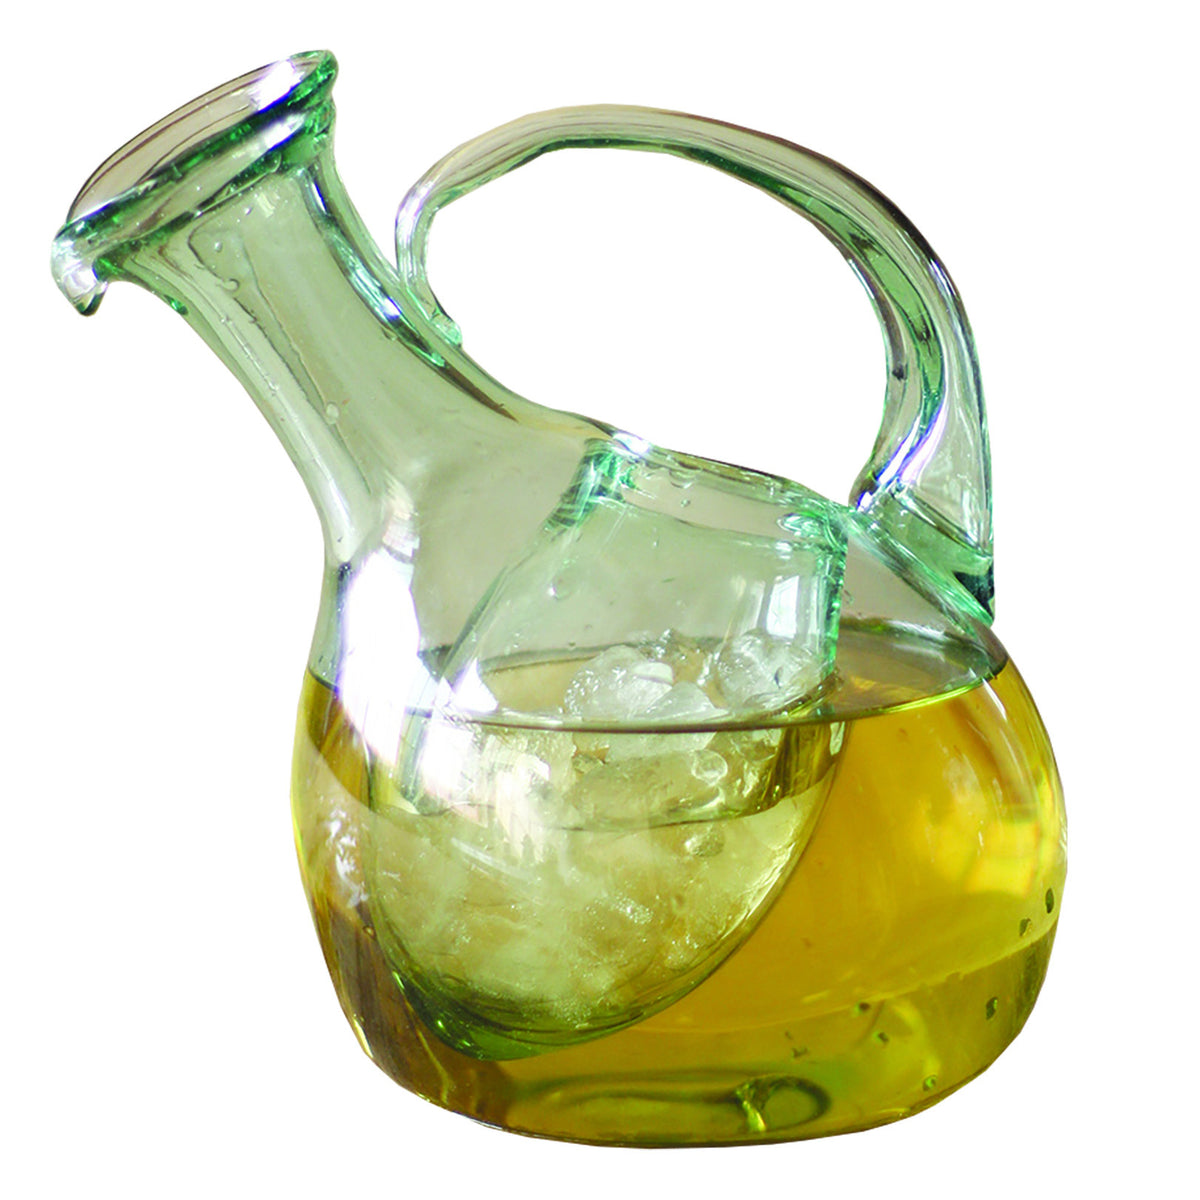 https://cdn.shopify.com/s/files/1/0010/0852/products/White_Modern_Tilted_Glass_Wine_Decanter_With_Ice_Pocket_1200x1200.jpg?v=1571436293